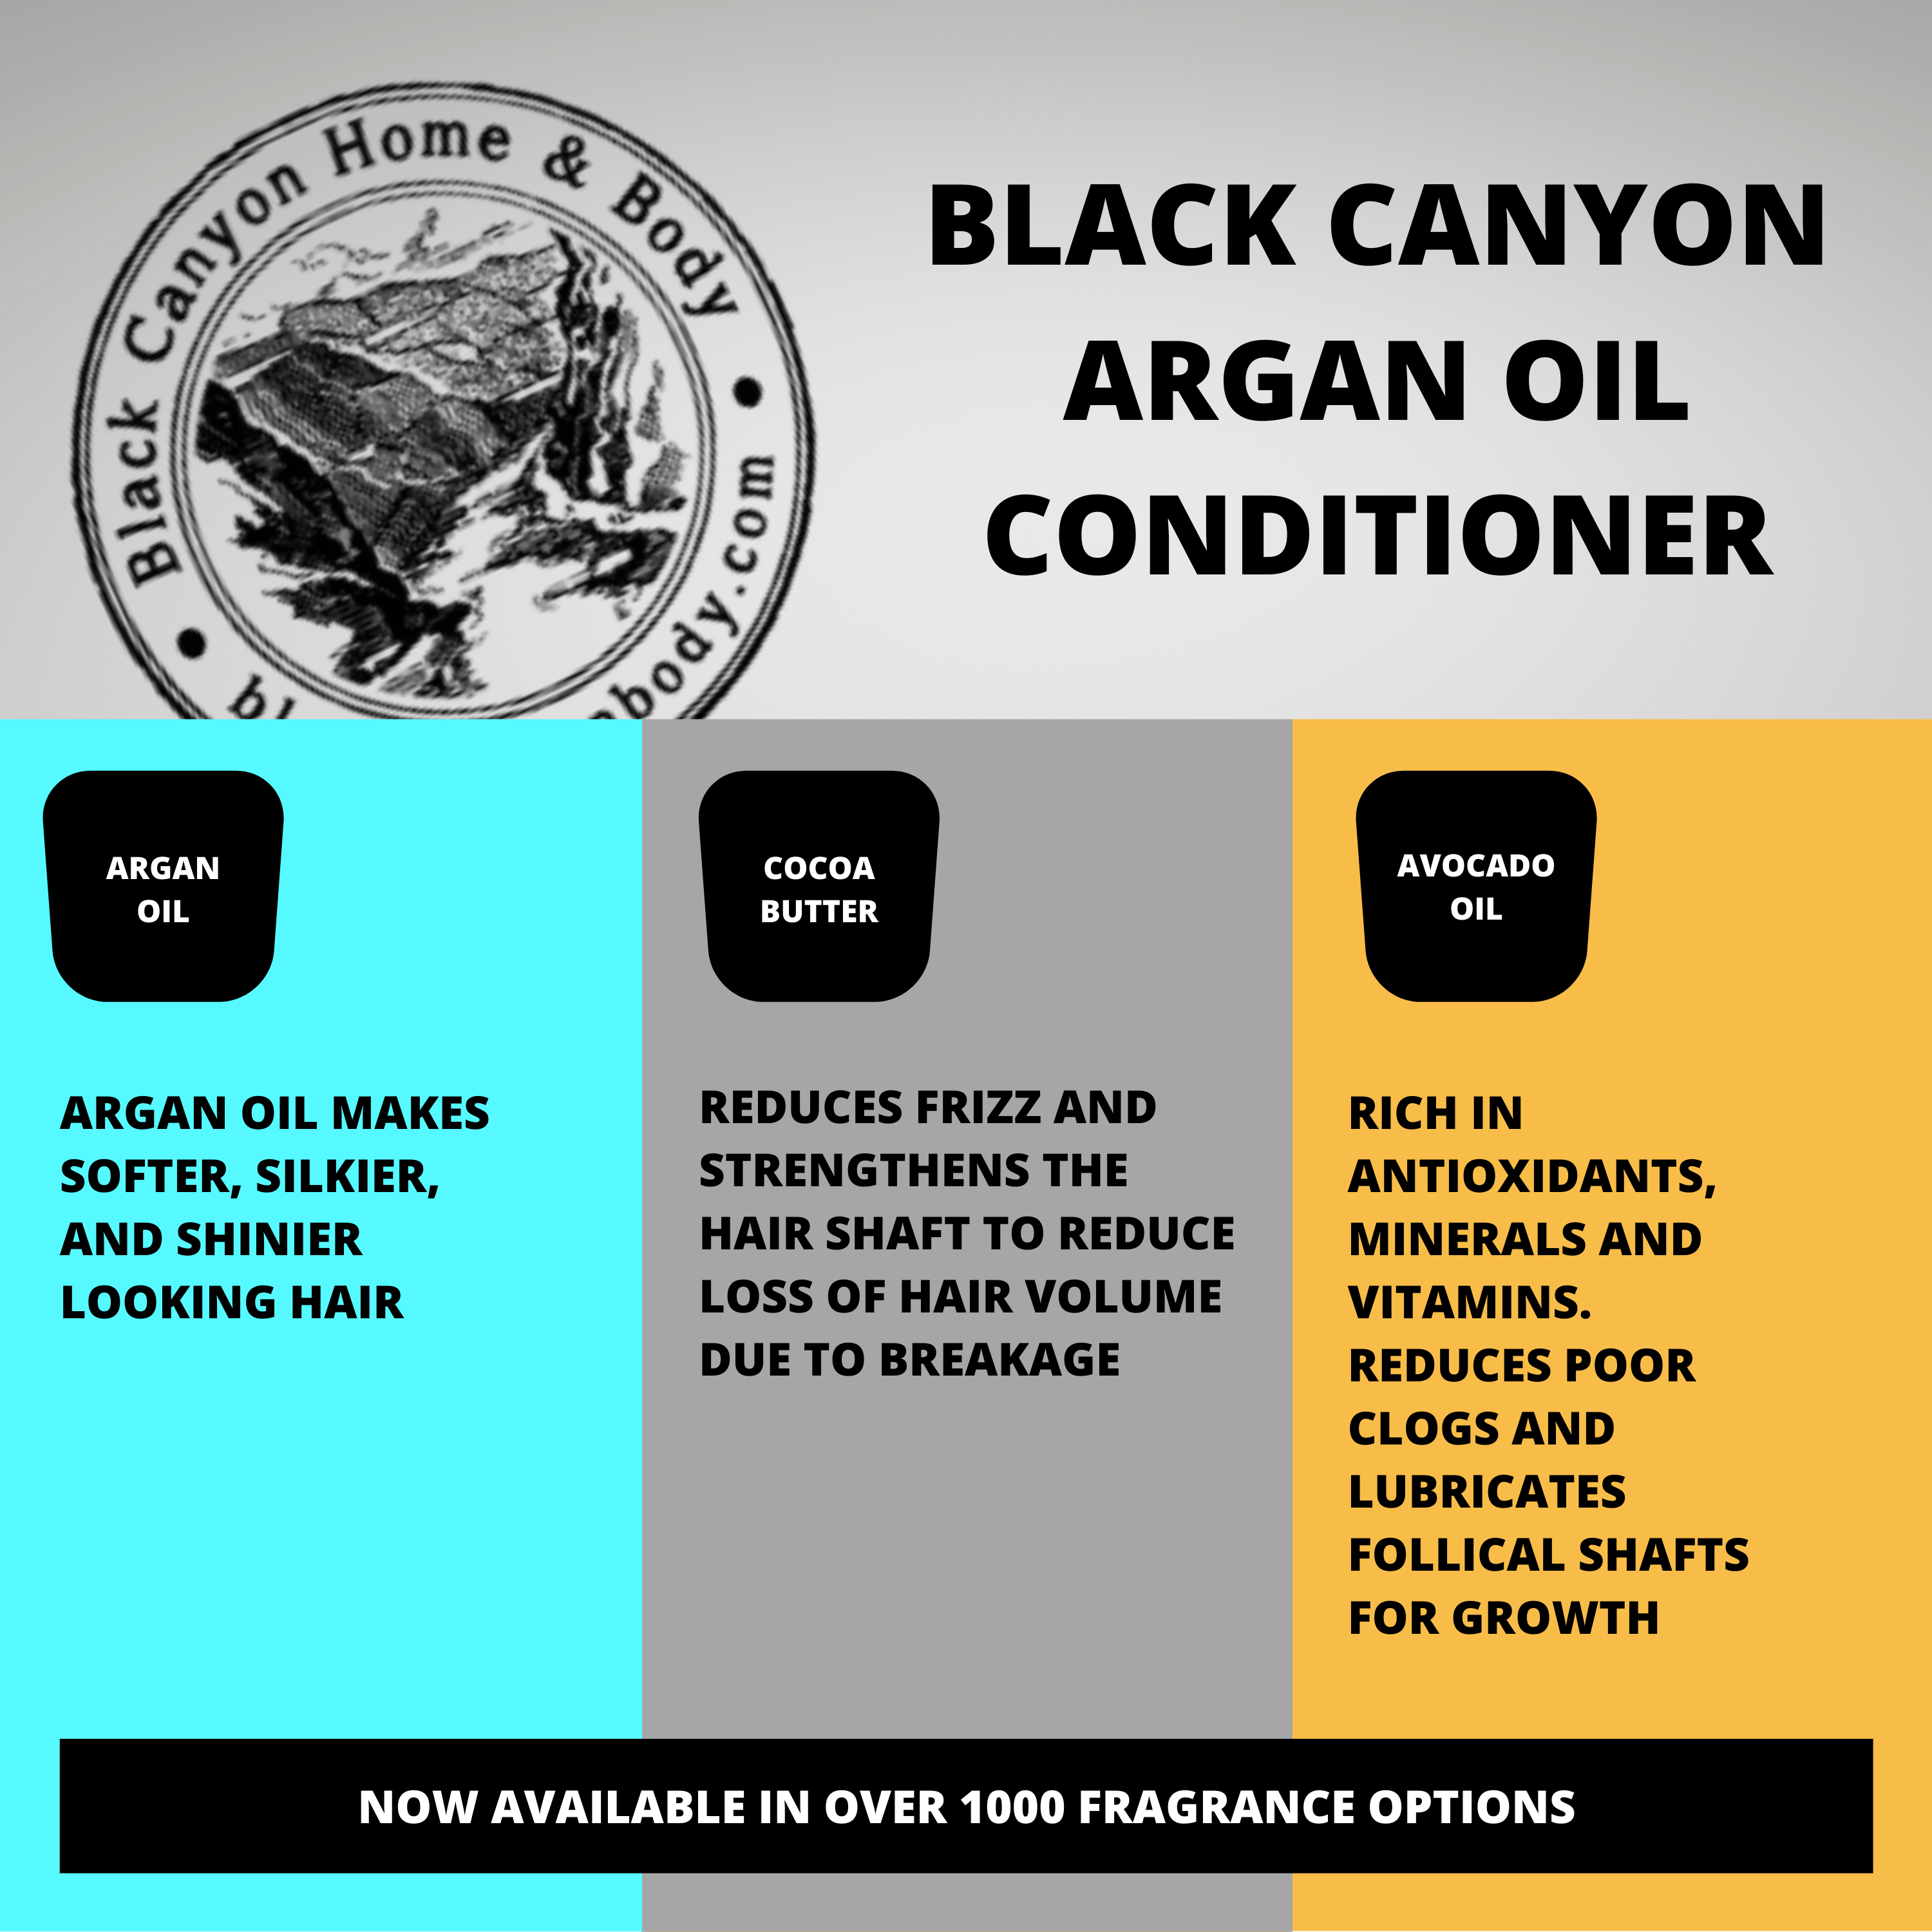 Black Canyon Berries & Cream Scented Conditioner with Argan Oil